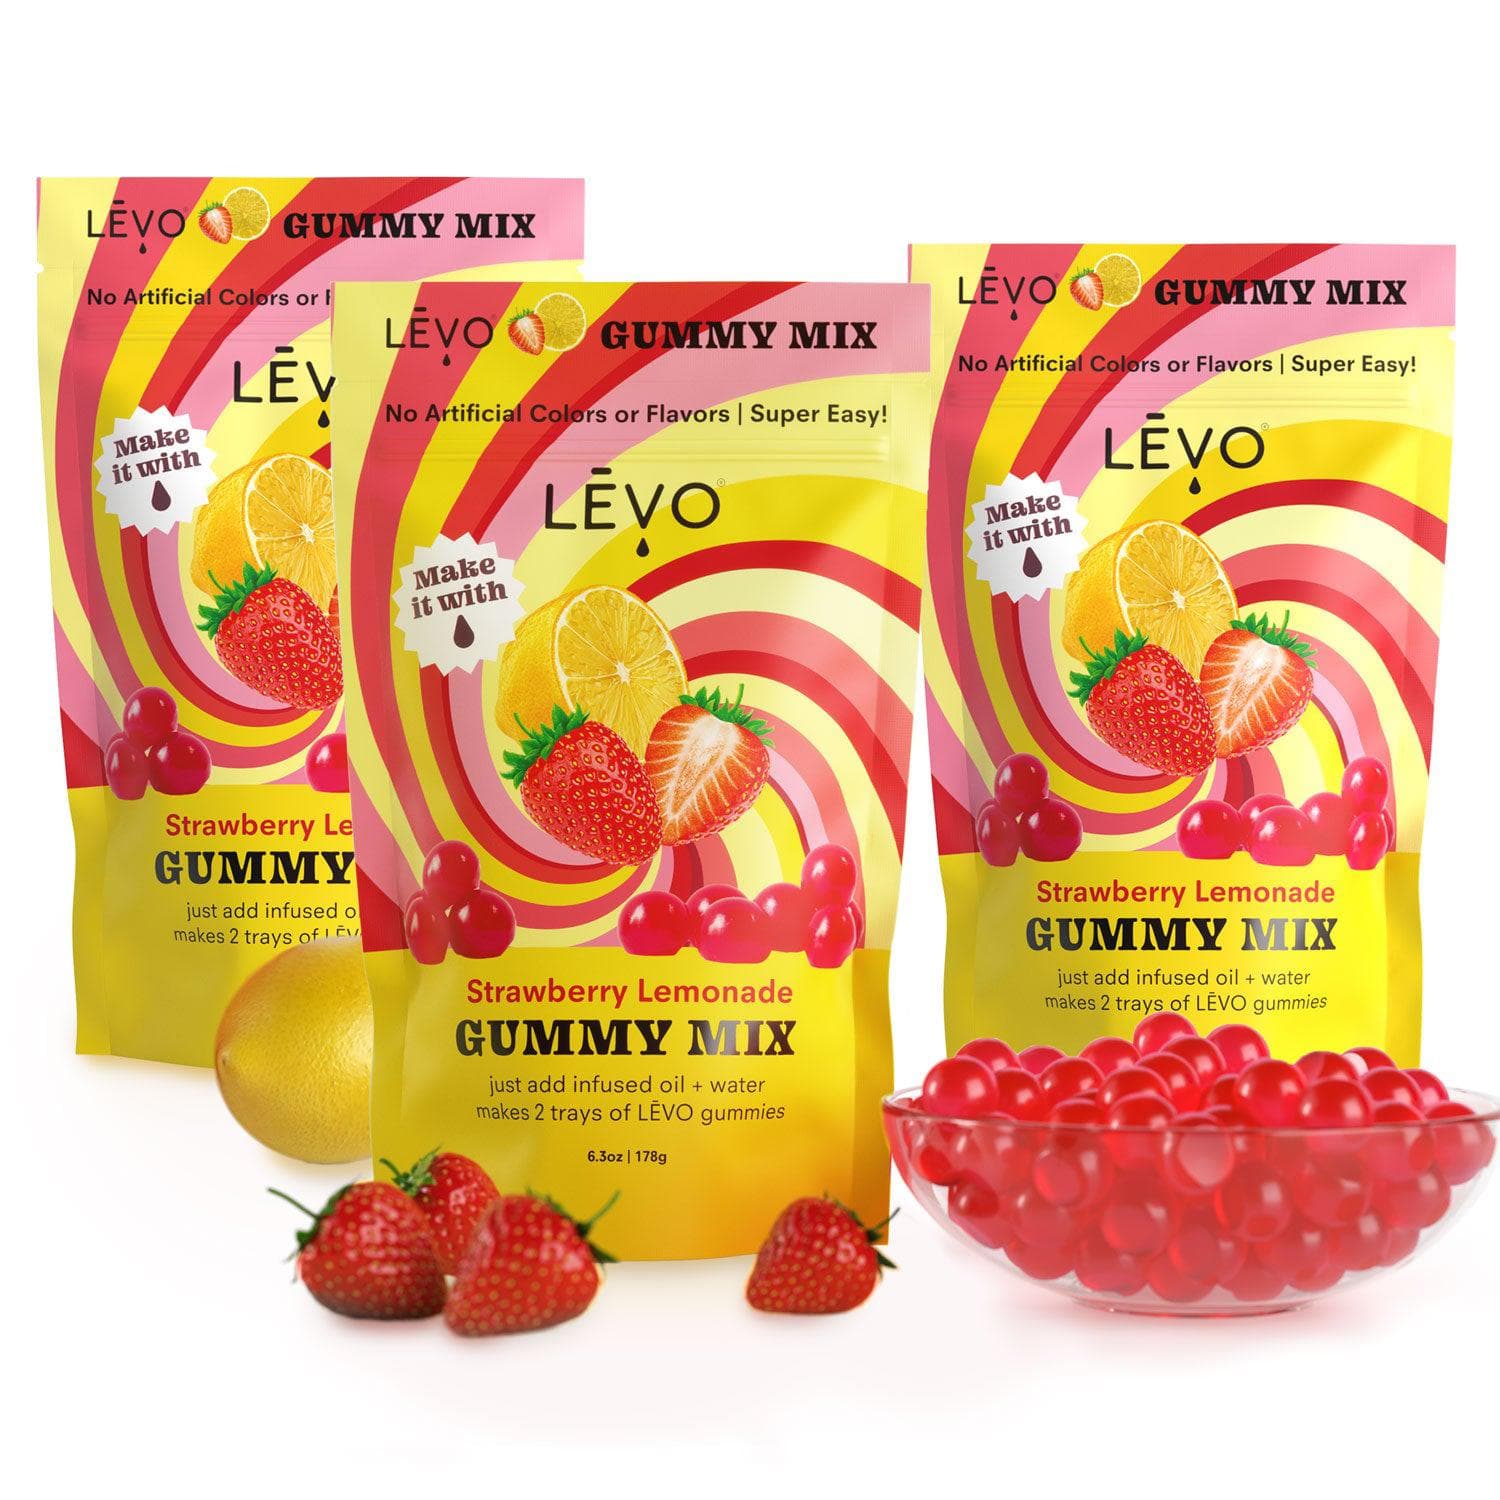 Three pack of LĒVO Strawberry Lemonade Gummy Mix. Bundle and Save! Make your own edibles with LEVO gummy mix.